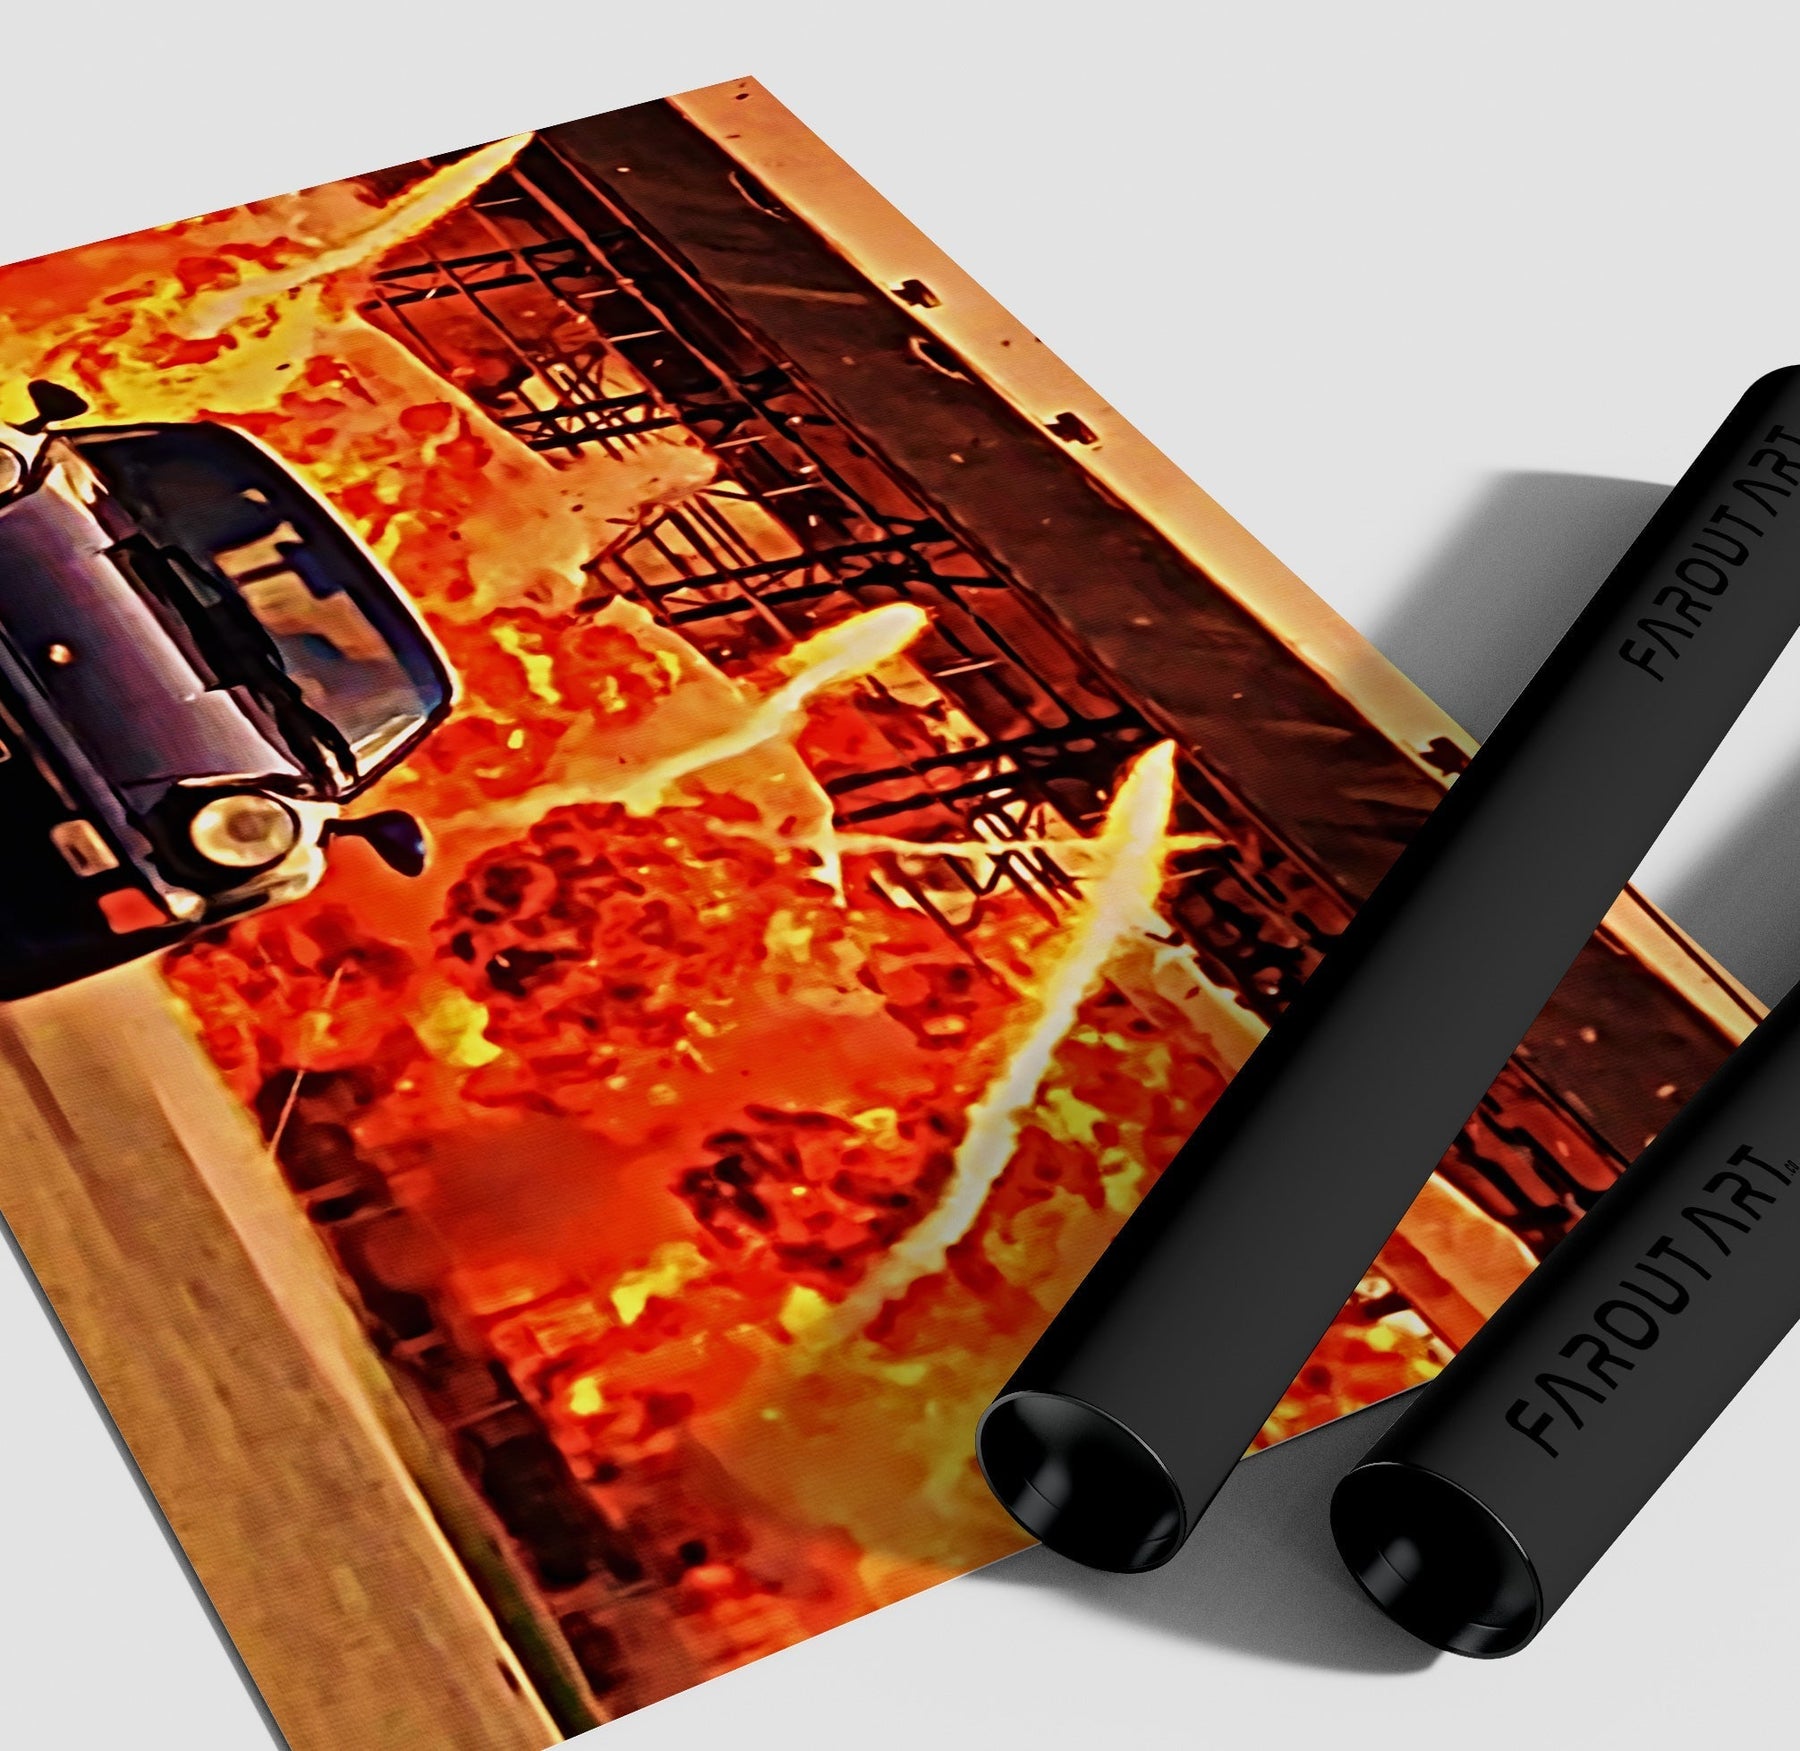 Bad Boys Fast Cars & Explosions Prints | Far Out Art 